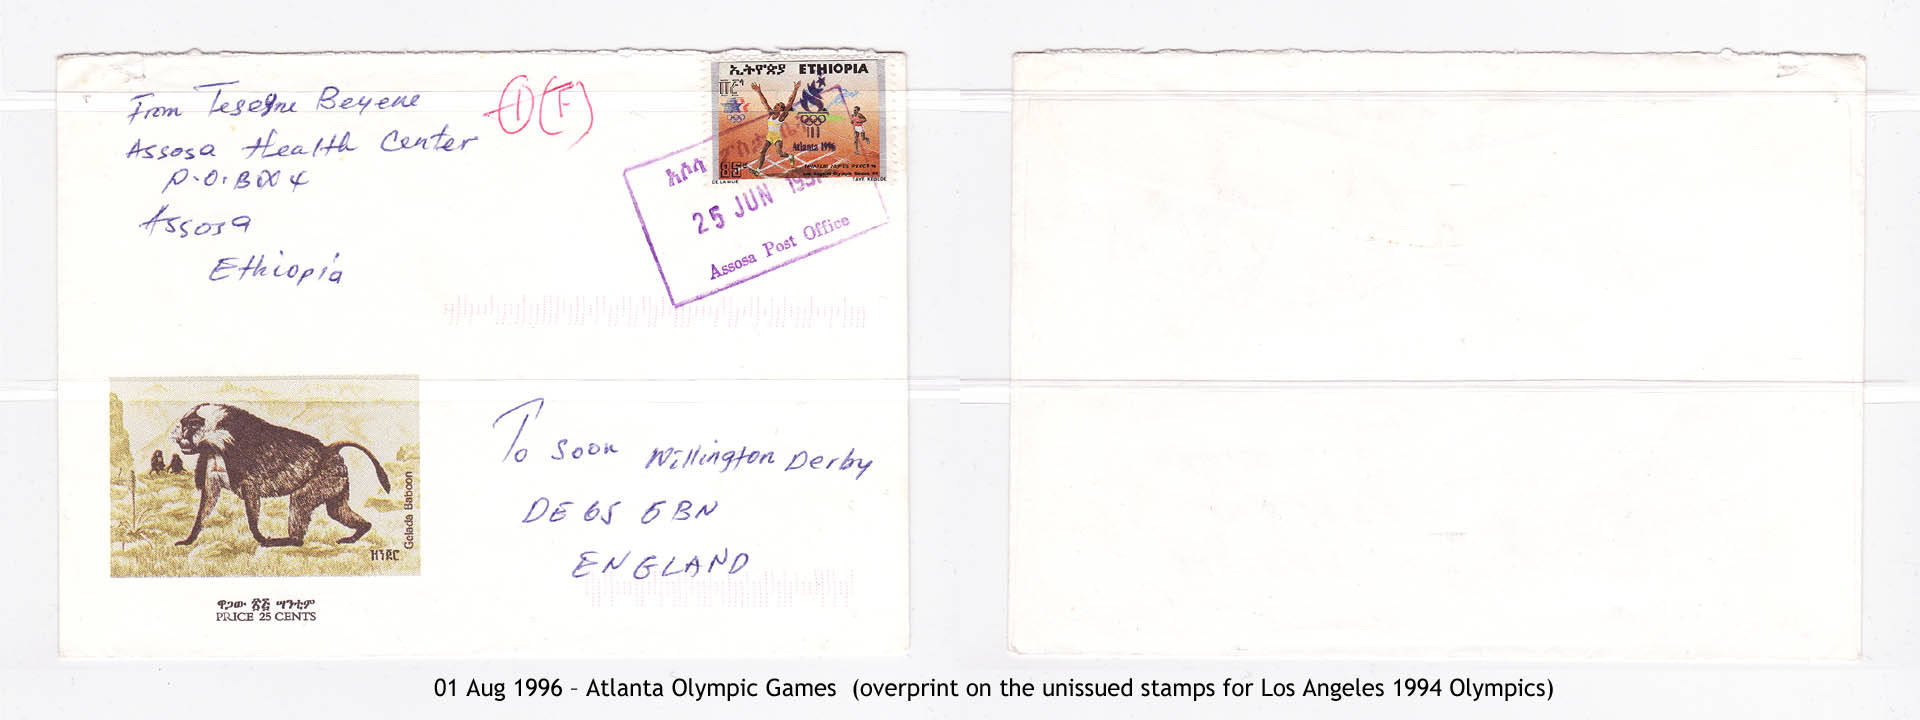 19960801 – Atlanta Olympic Games (overprint on the unissued stamps for Los Angeles 1994 Olympics)